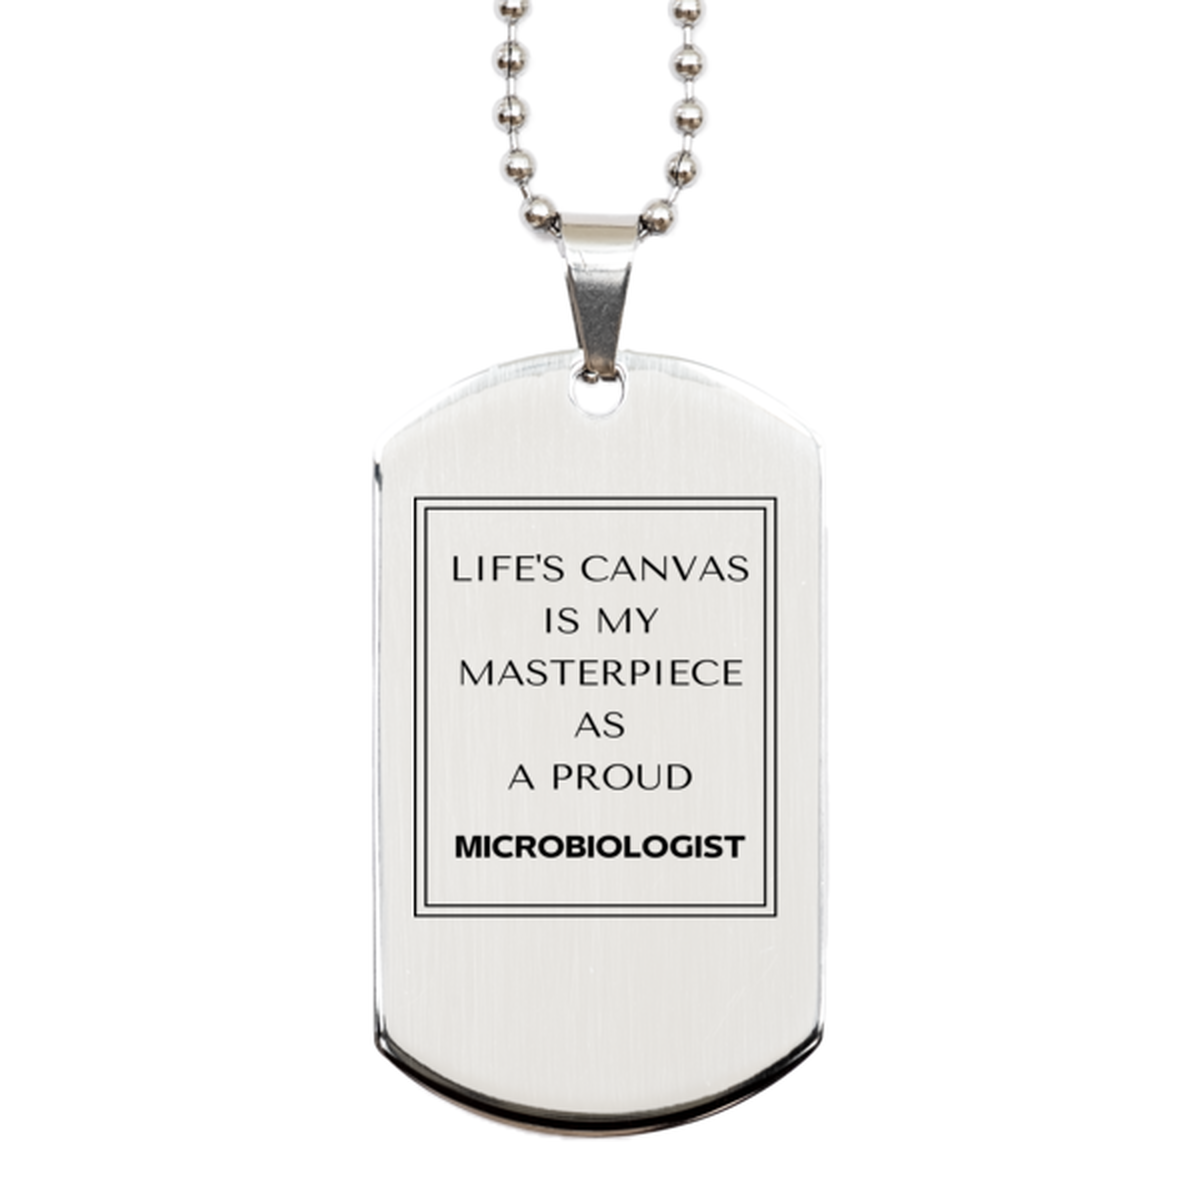 Proud Microbiologist Gifts, Life's canvas is my masterpiece, Epic Birthday Christmas Unique Silver Dog Tag For Microbiologist, Coworkers, Men, Women, Friends